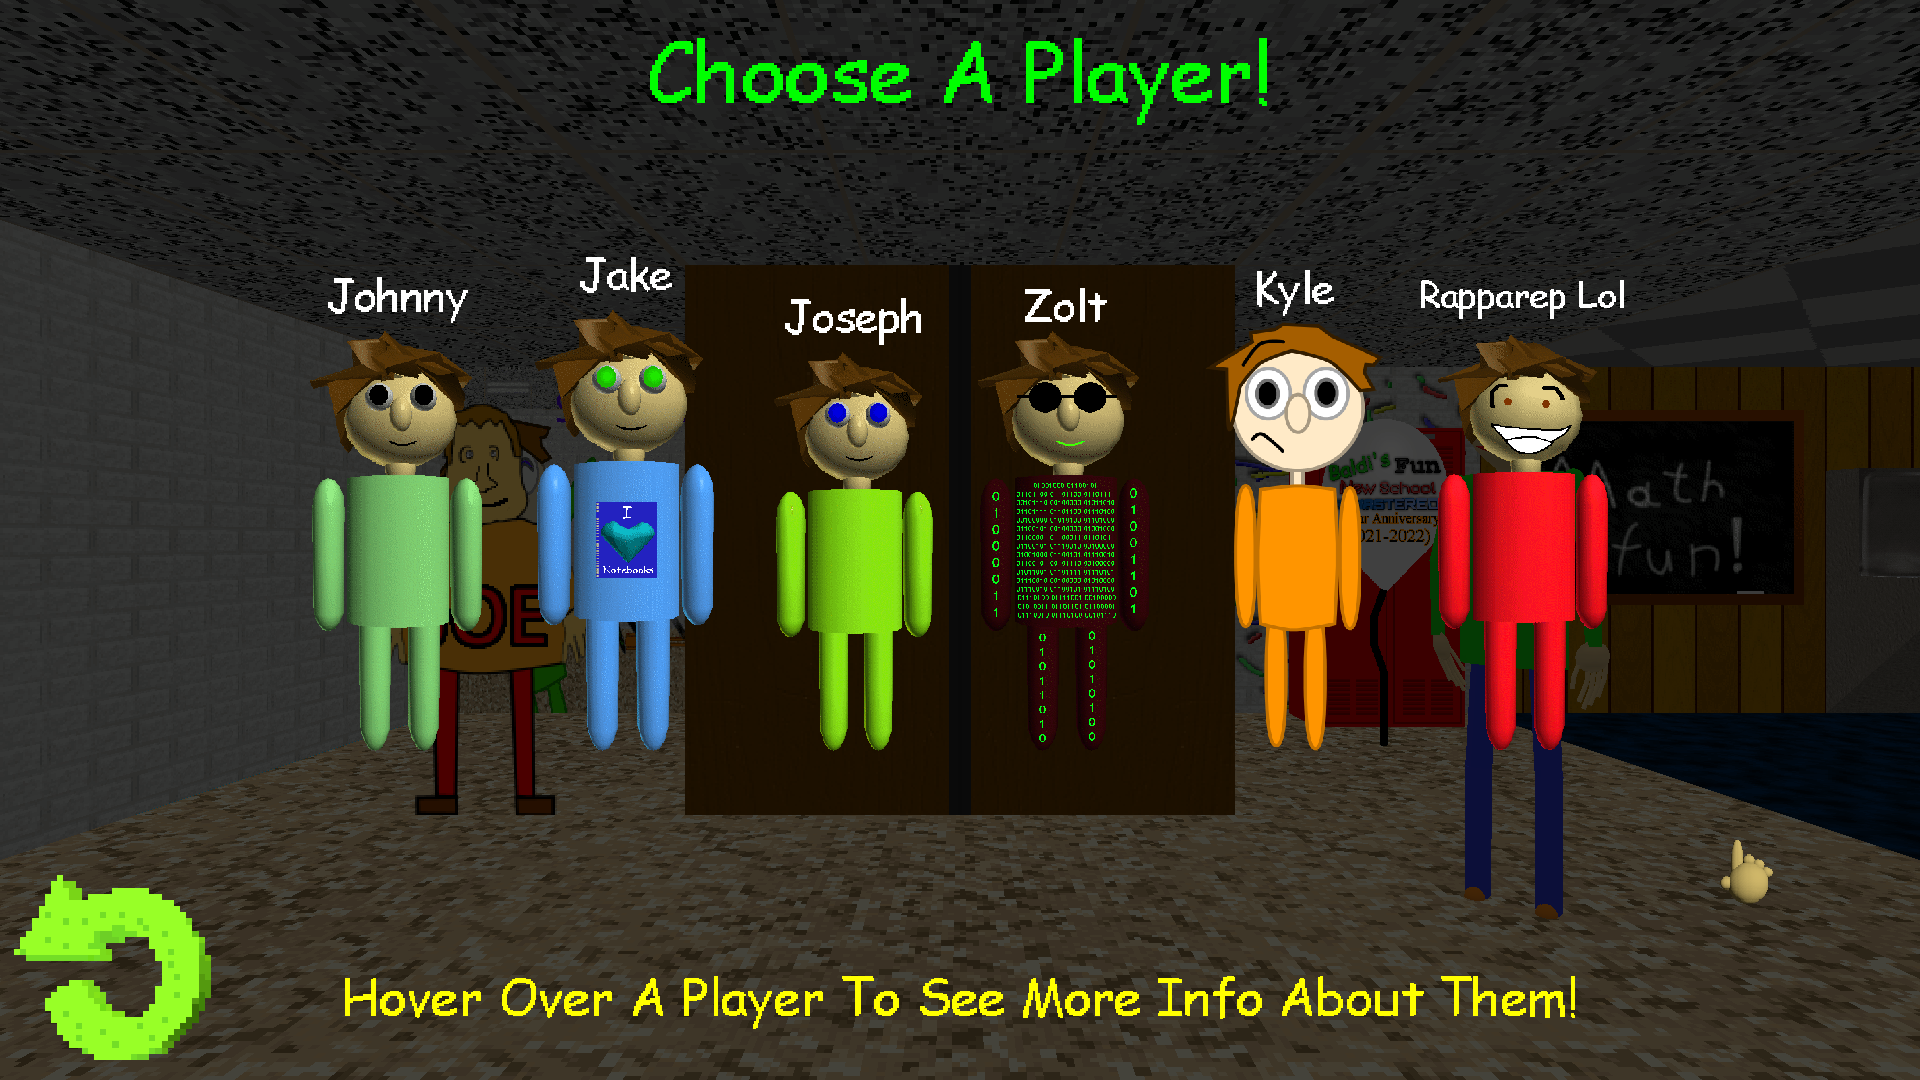 Stream Baldi's Basics Plus OST- Party Event (Extended) by MrRoomFan